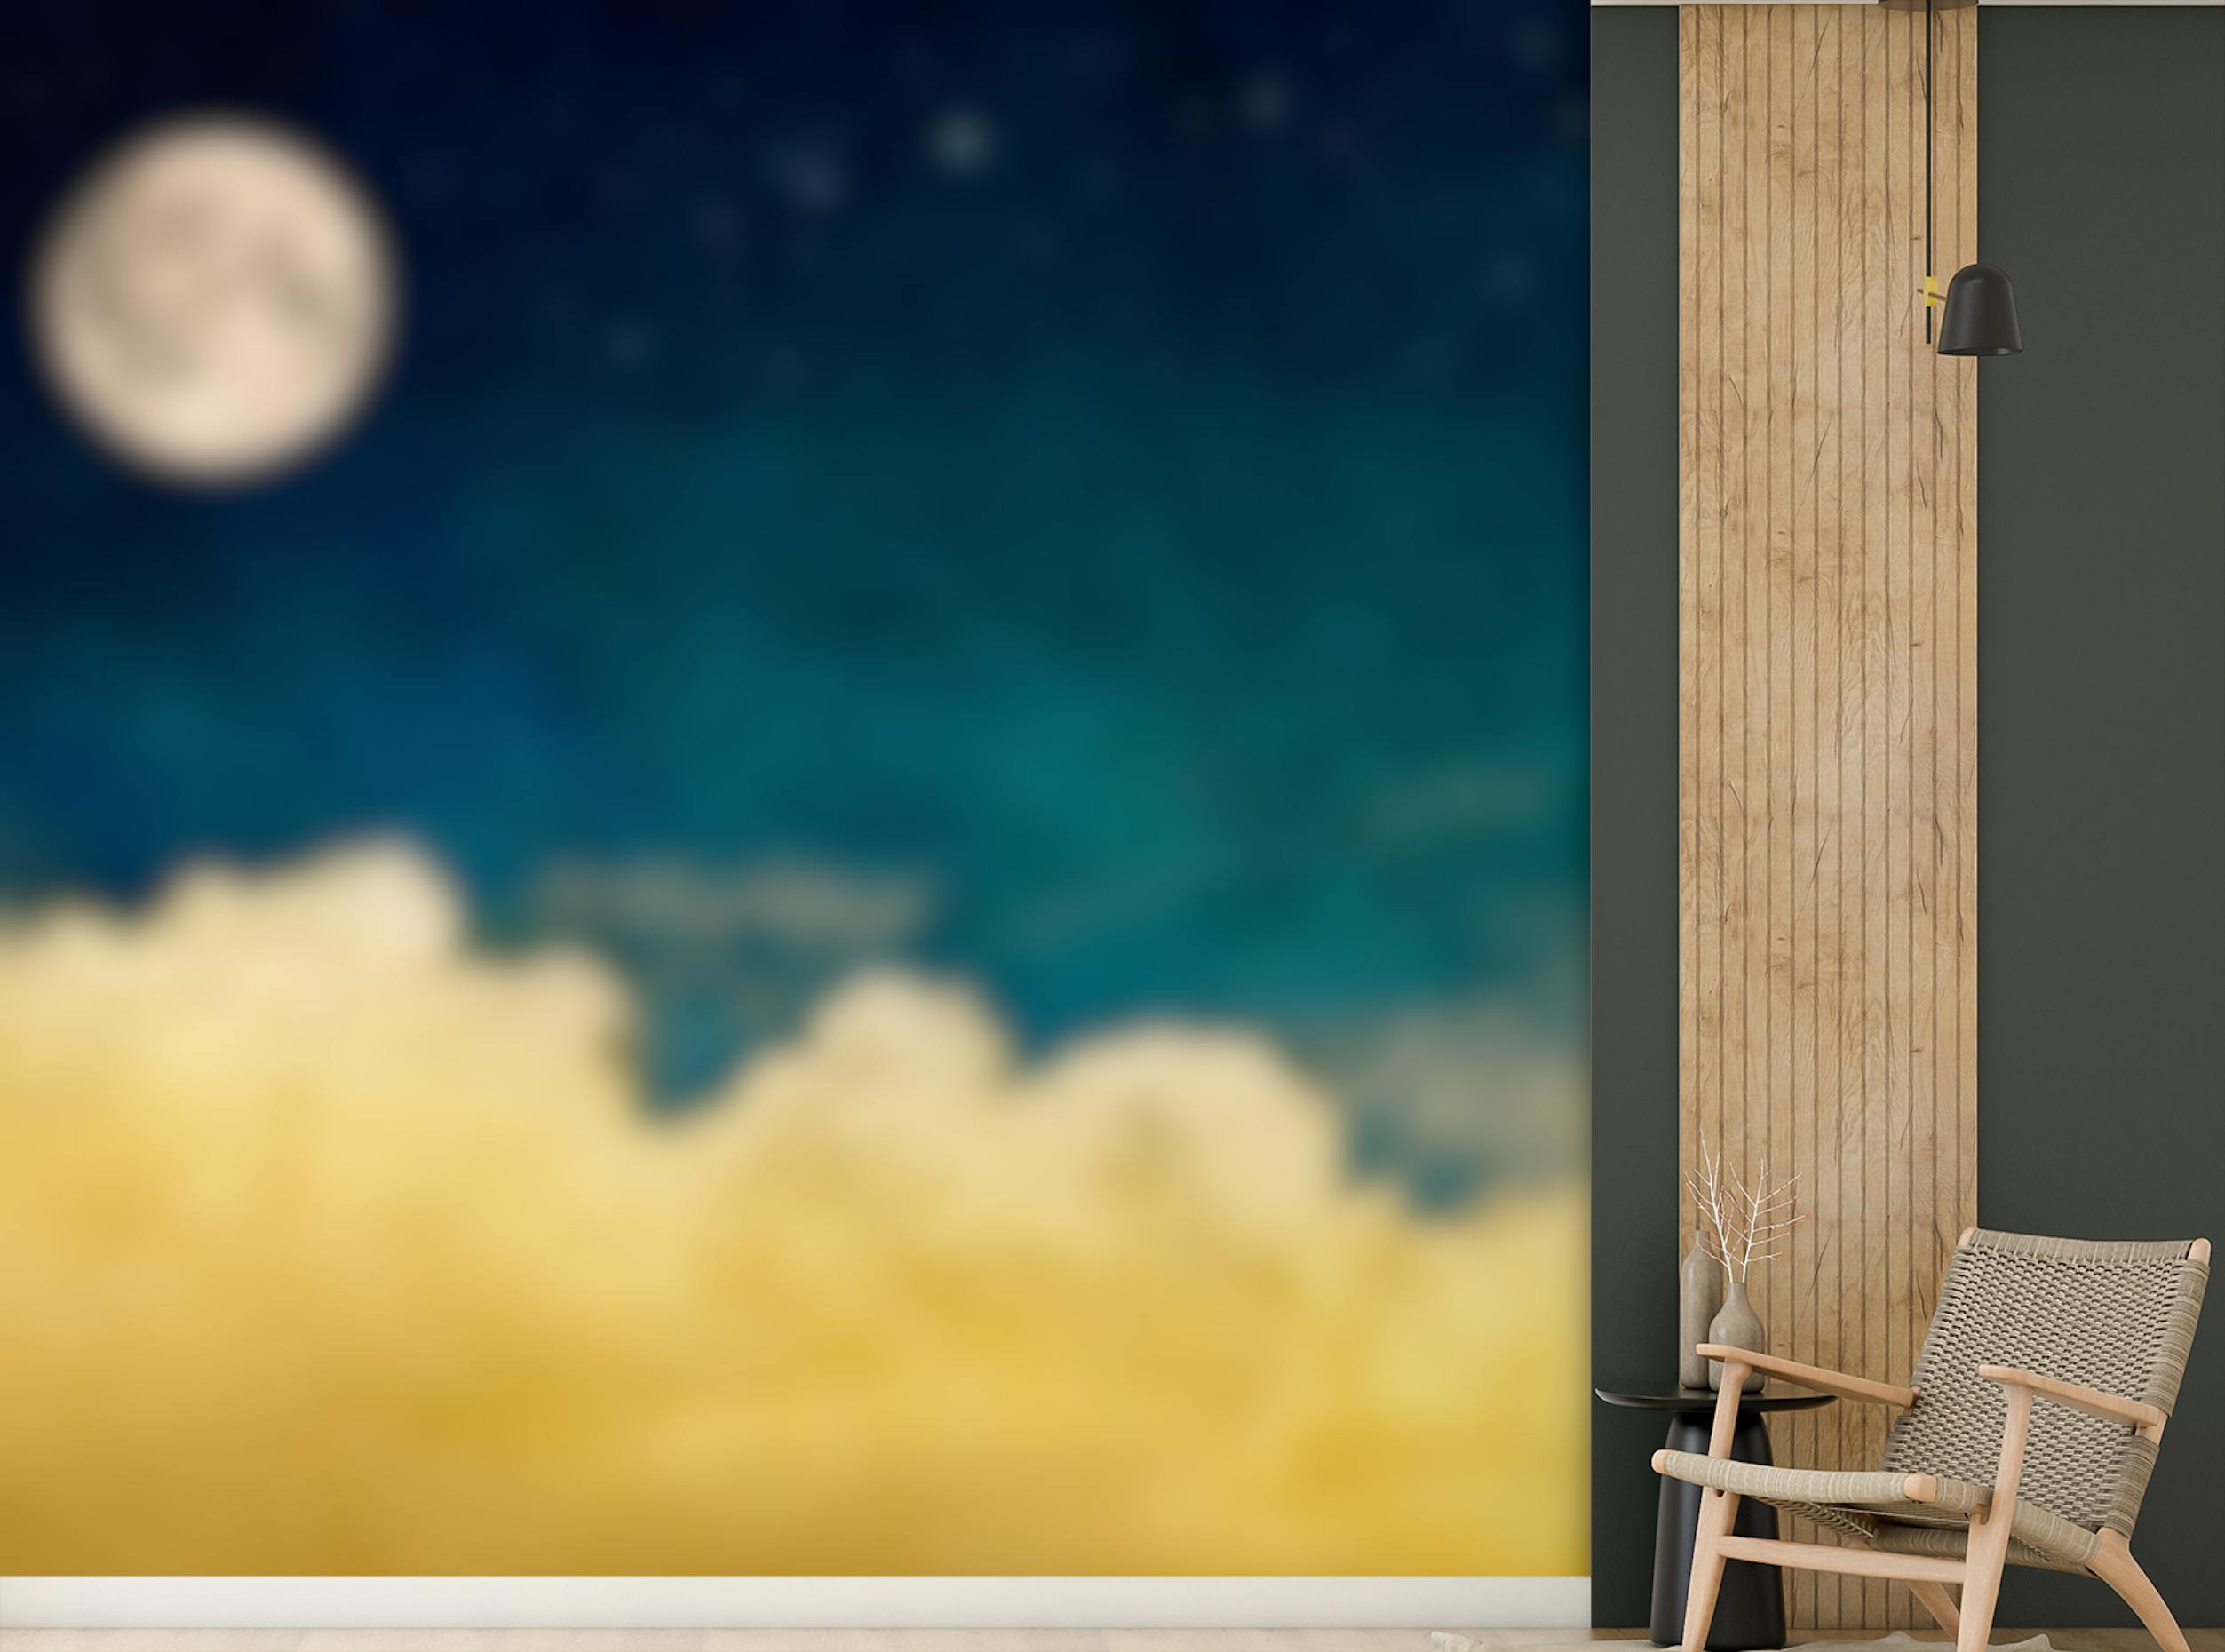 Peel and Stick Vivid Yellow Cloud with Full moon wallpaper Mural